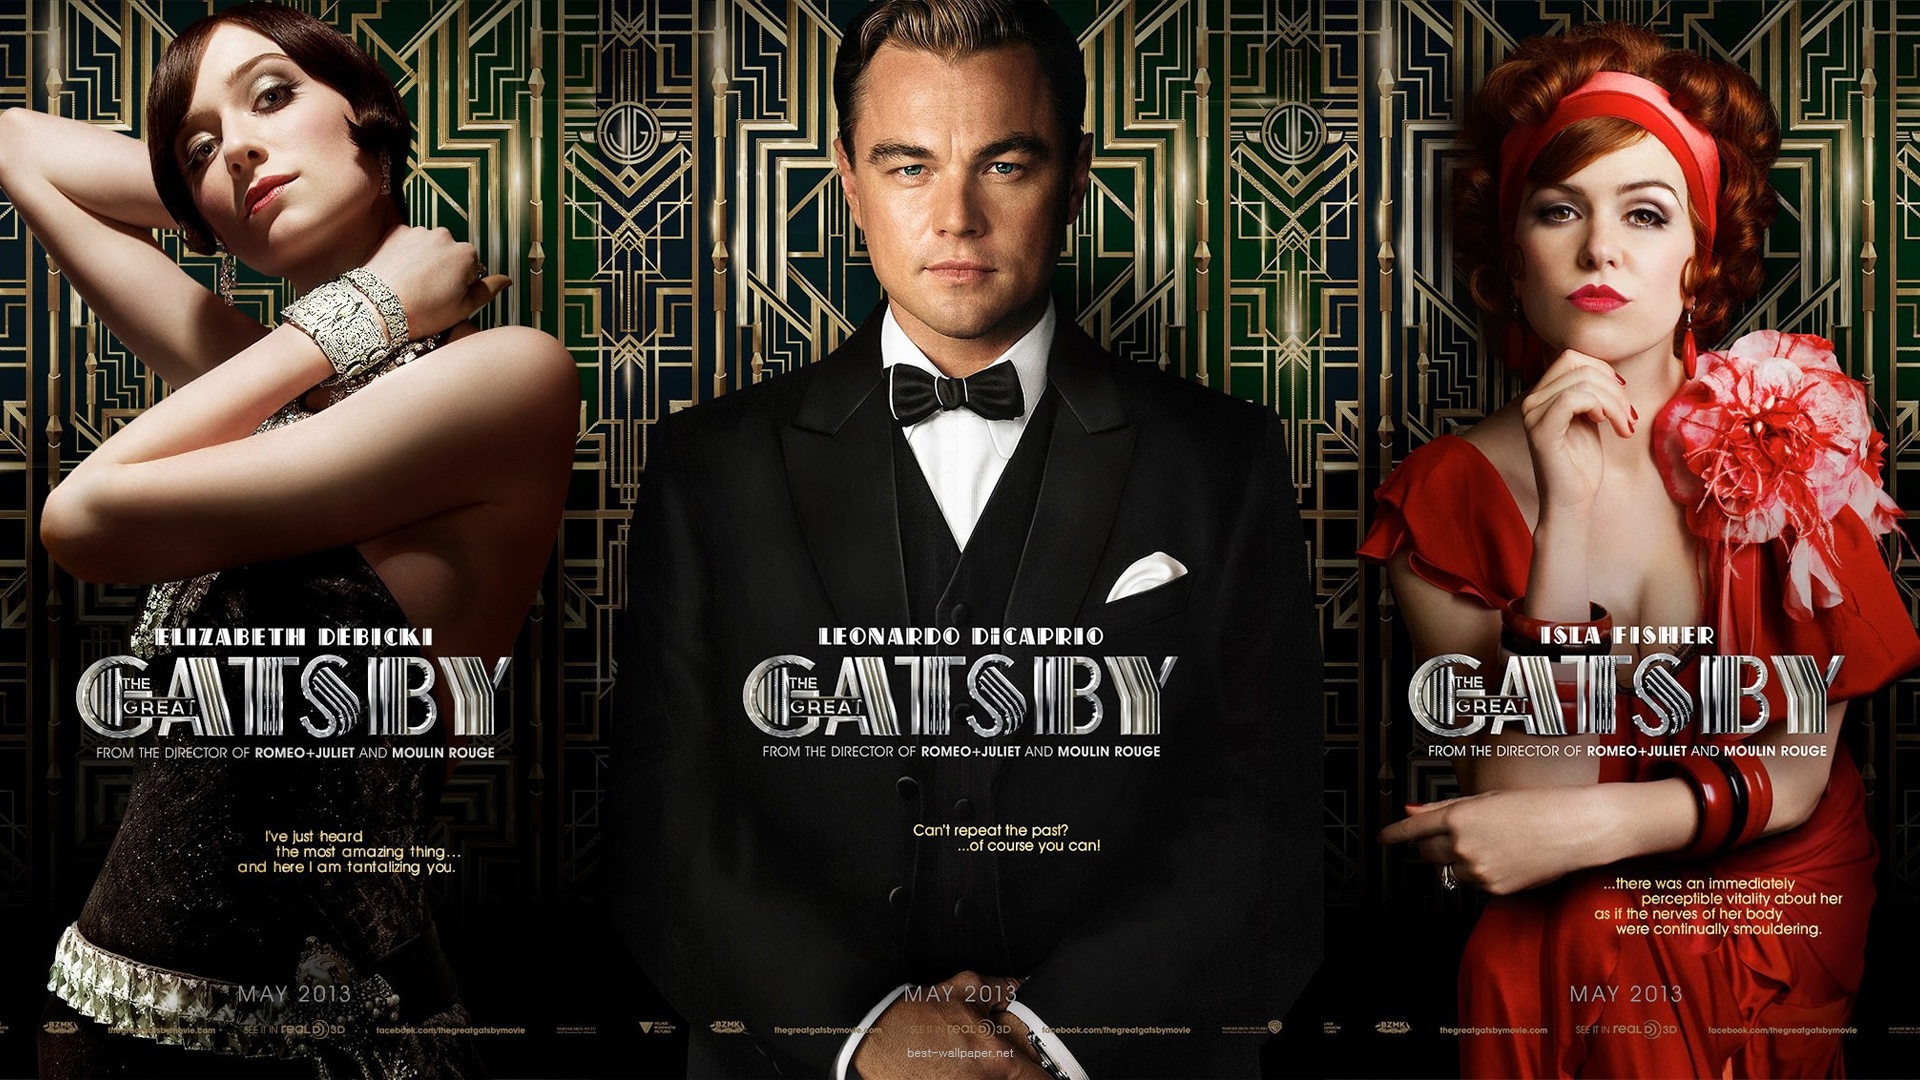 Download This Wallpaper - Great Gatsby Character Posters , HD Wallpaper & Backgrounds